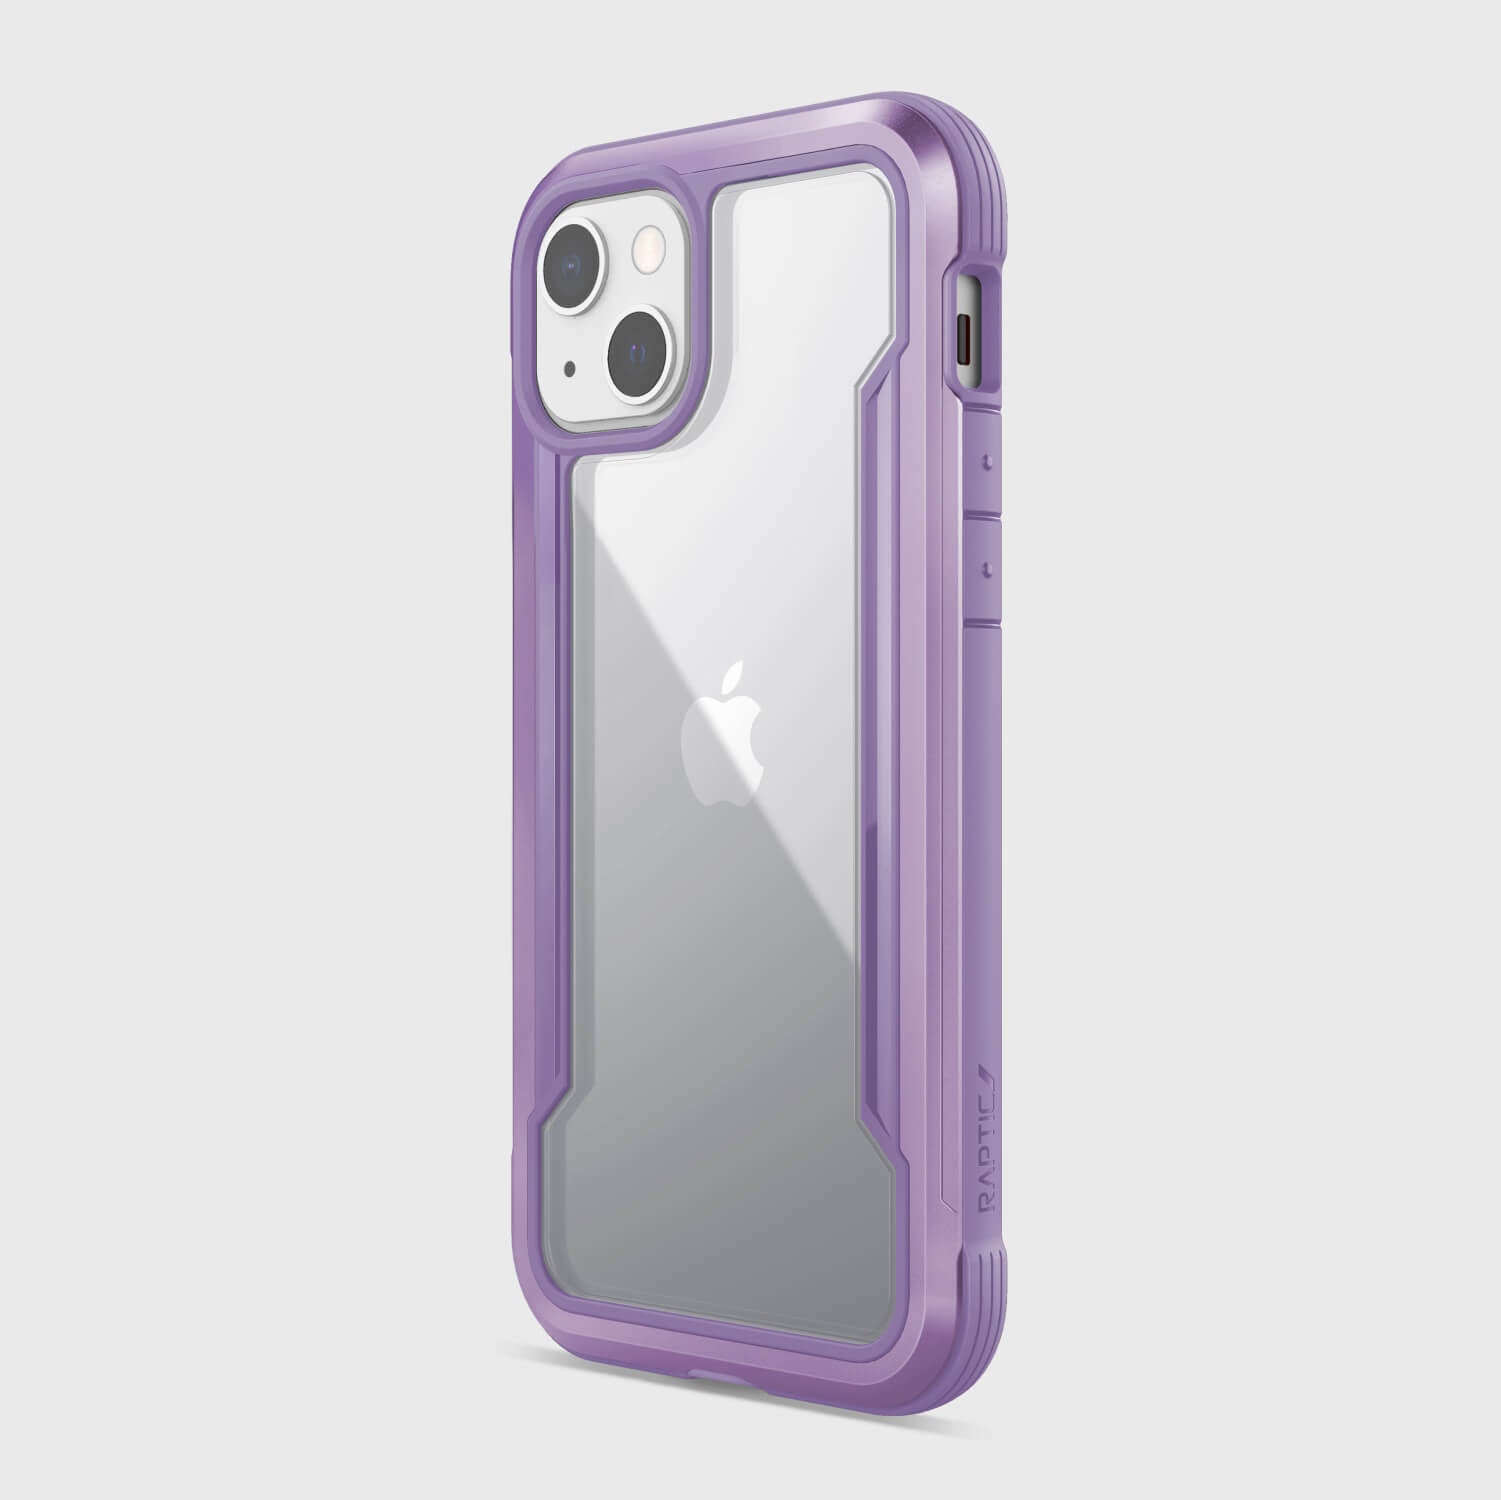 The purple iPhone 13 Mini Case - SHIELD PRO by Raptic is shown on a white background.